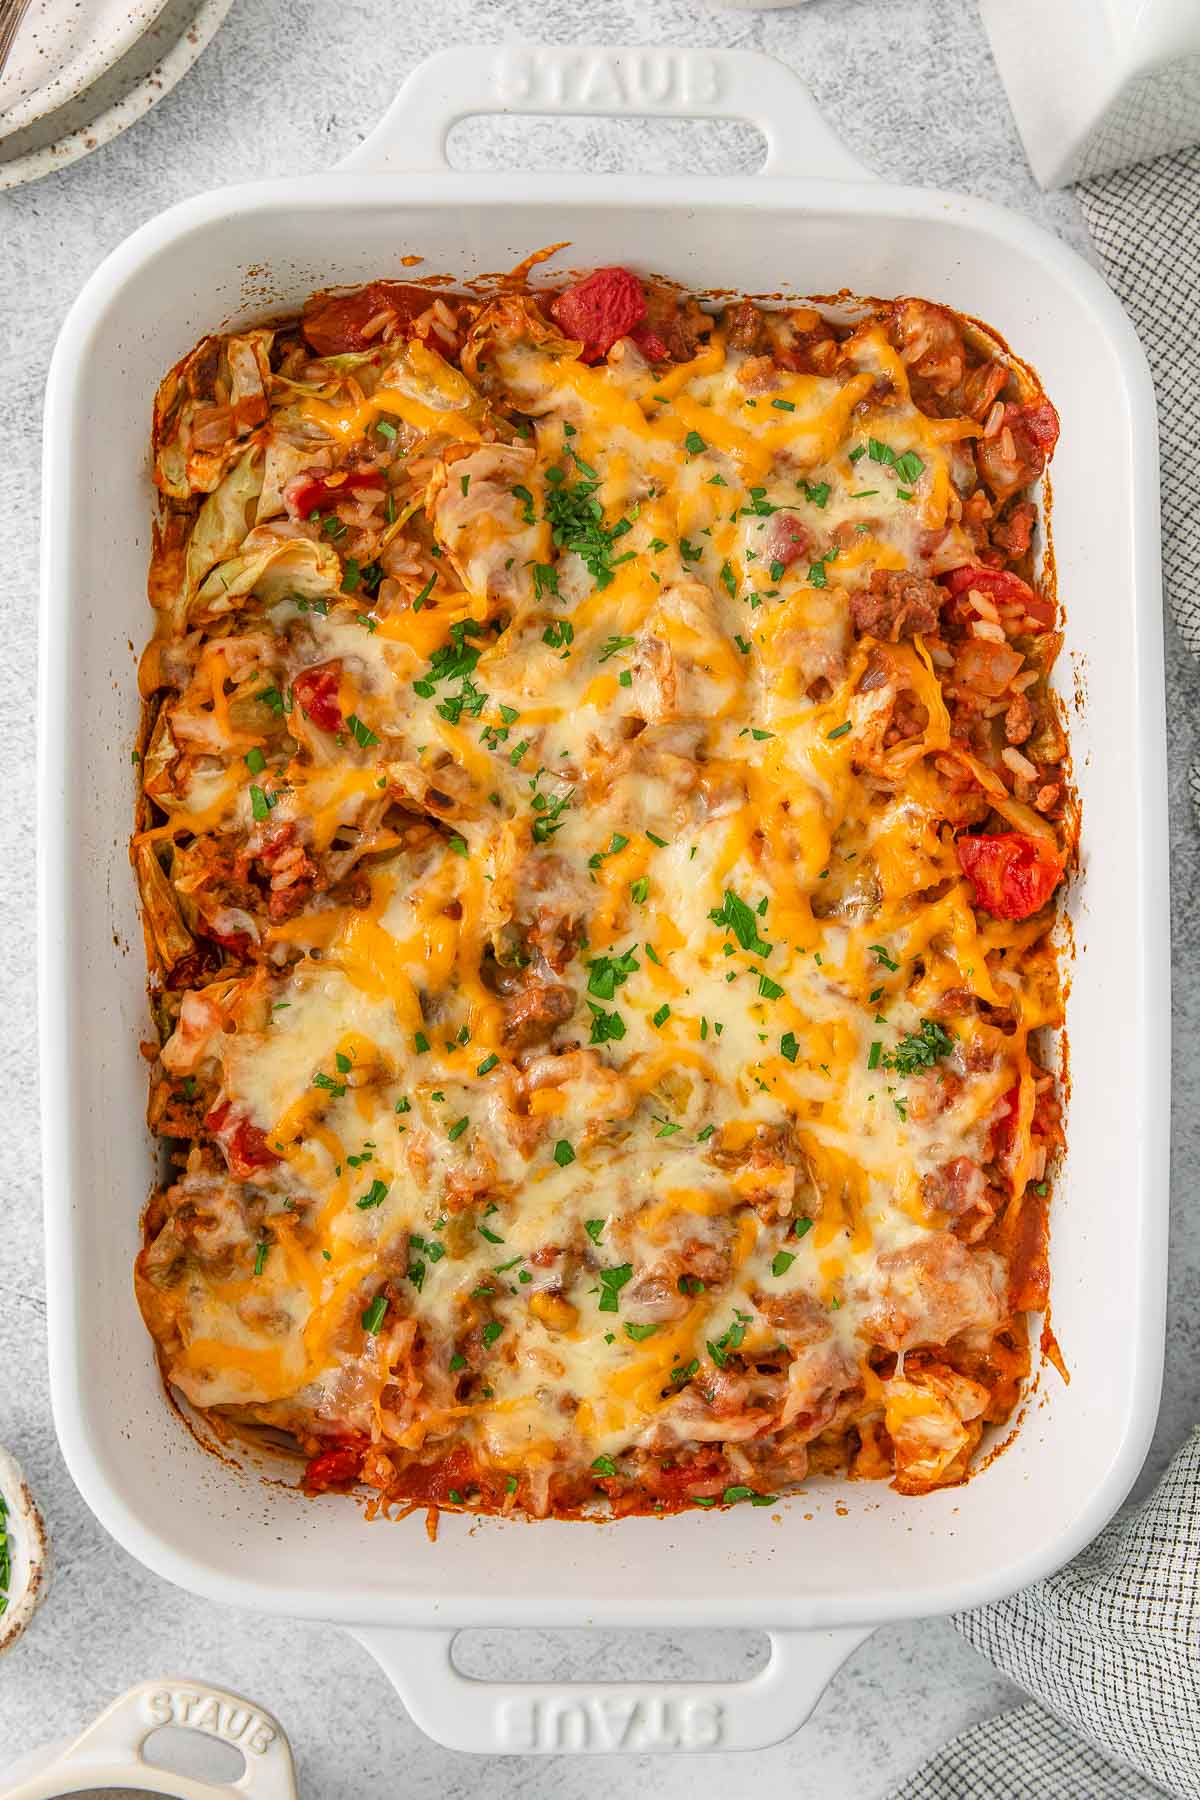 Cabbage roll casserole in a white baking dish.